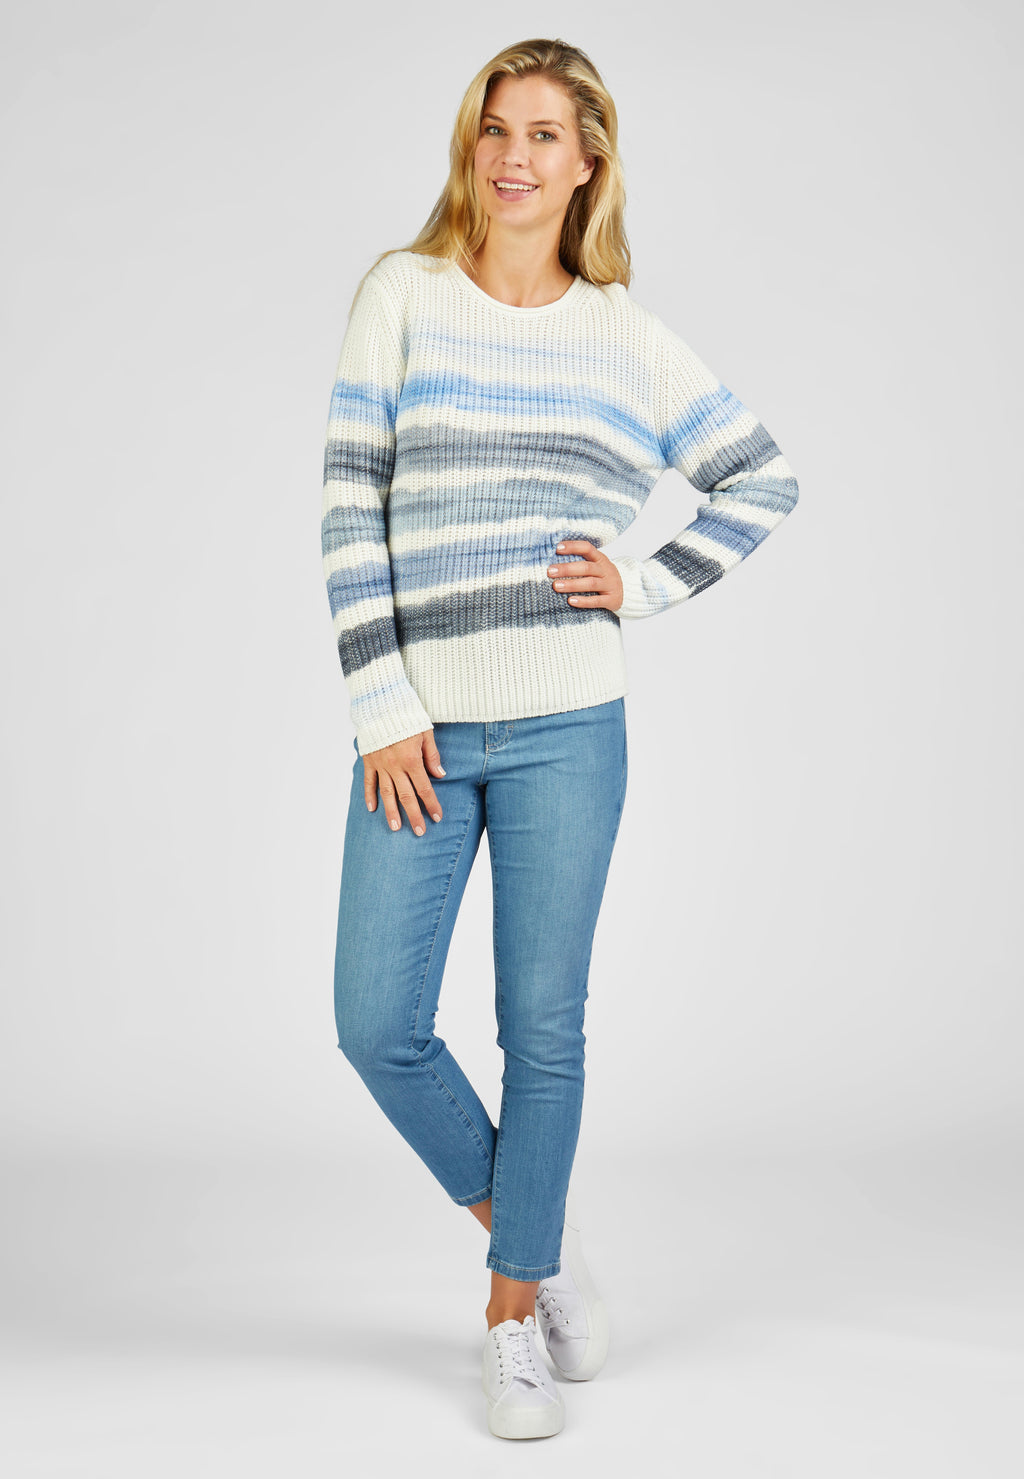 <p>Rabe indigo love collection roundneck knit jumper in cream with ombre blue horizontal stripes</p>